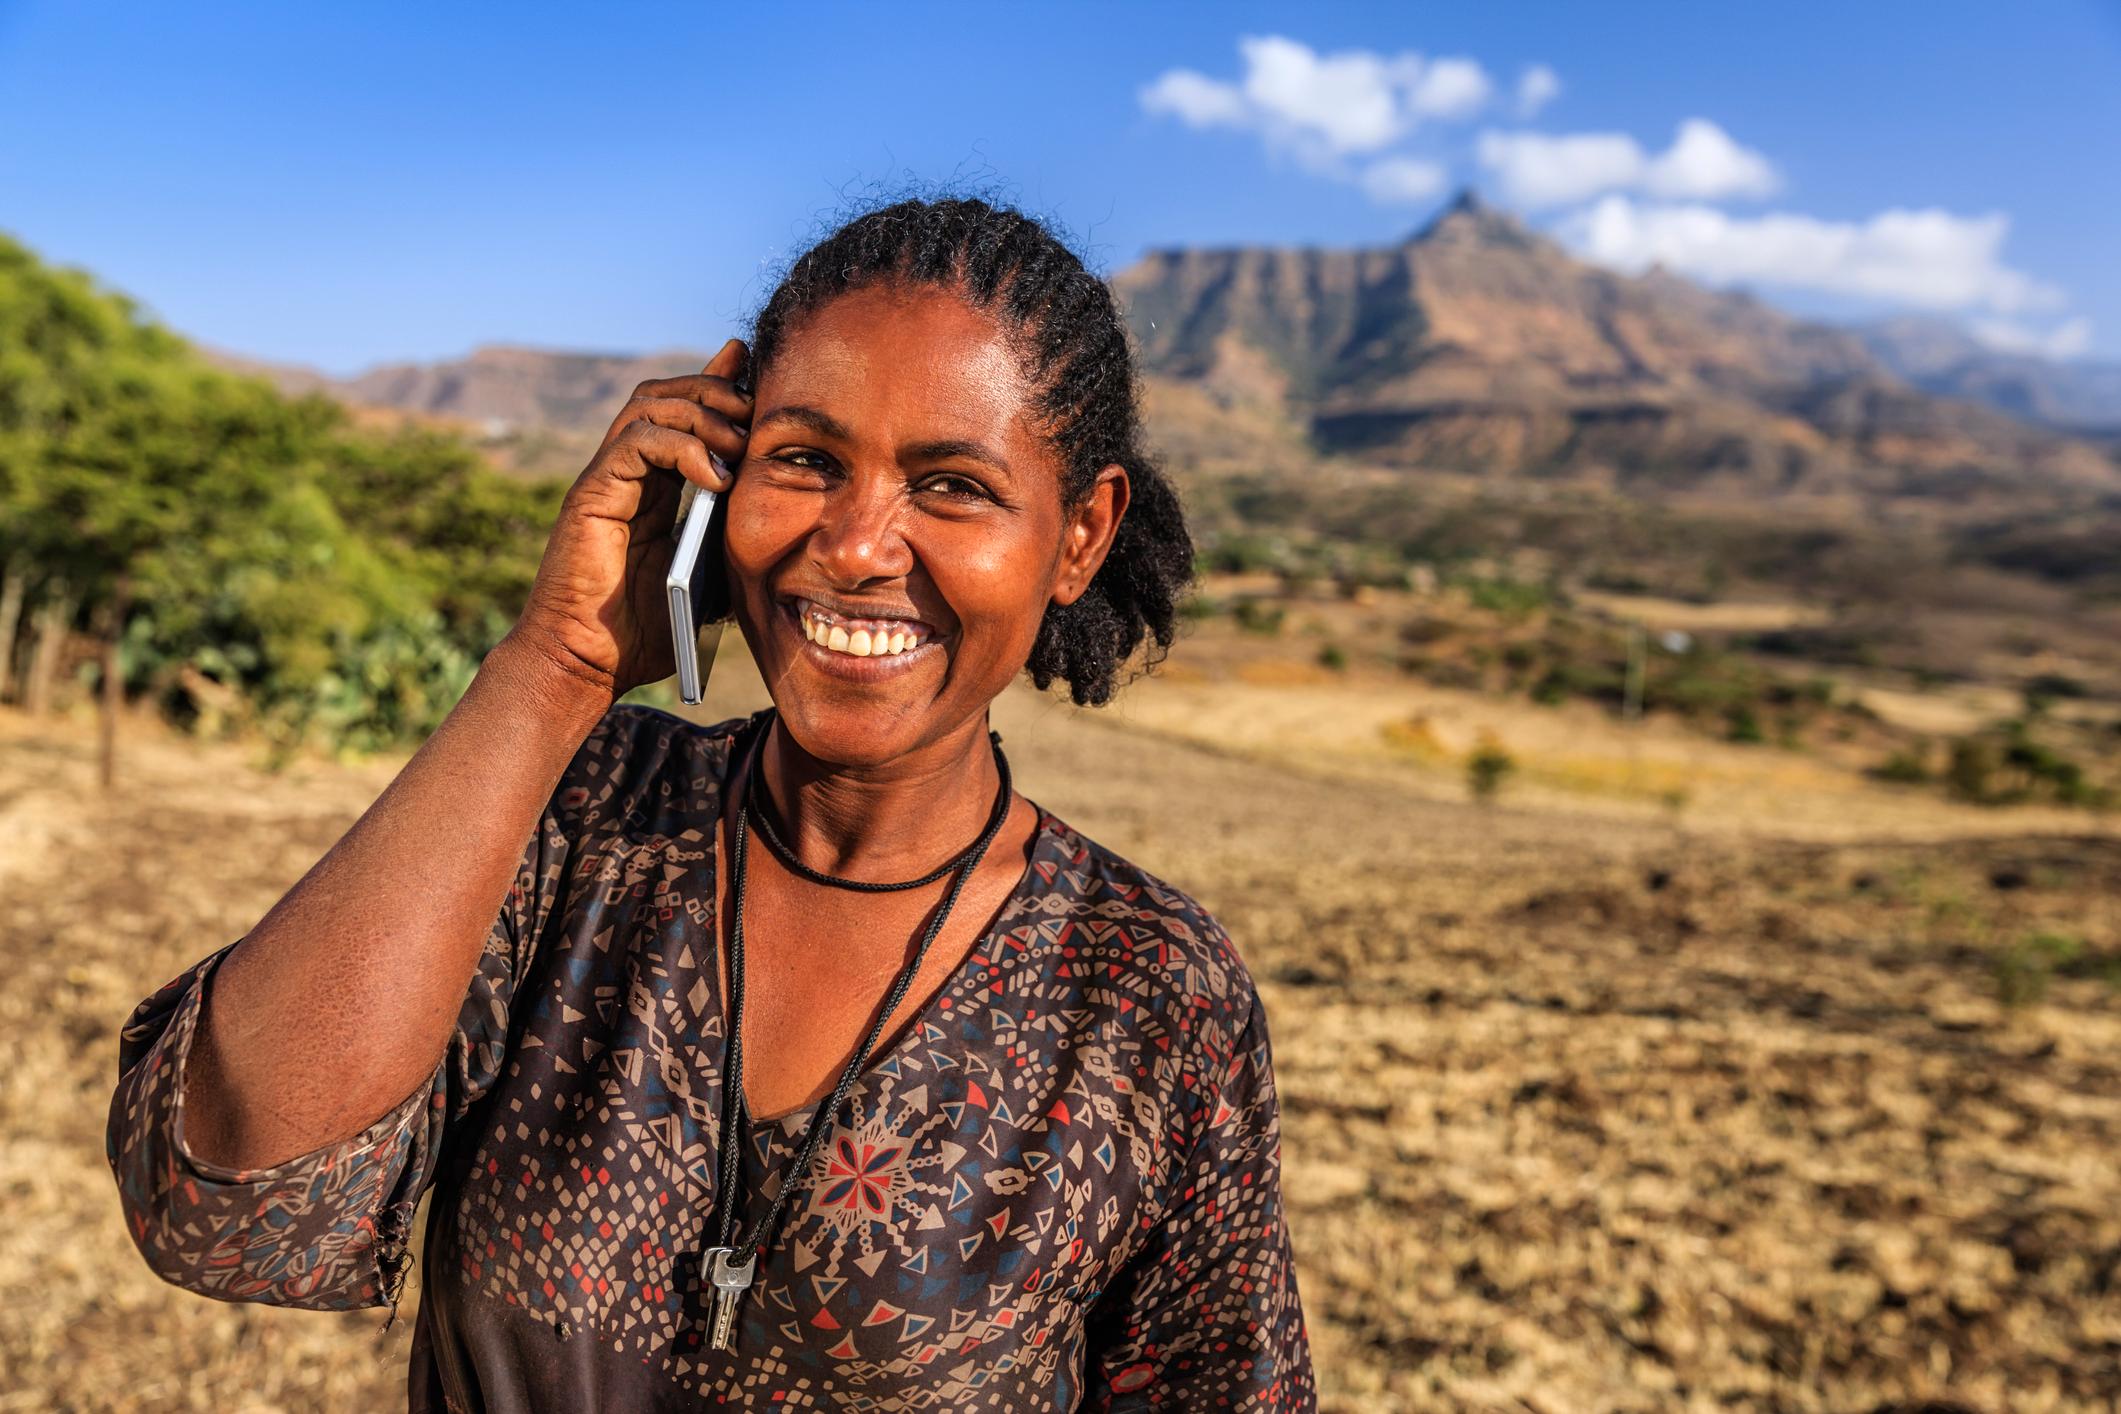 Essential credit comes to millions of women as microfinance and mobile money gain traction in Ethiopia 🇪🇹